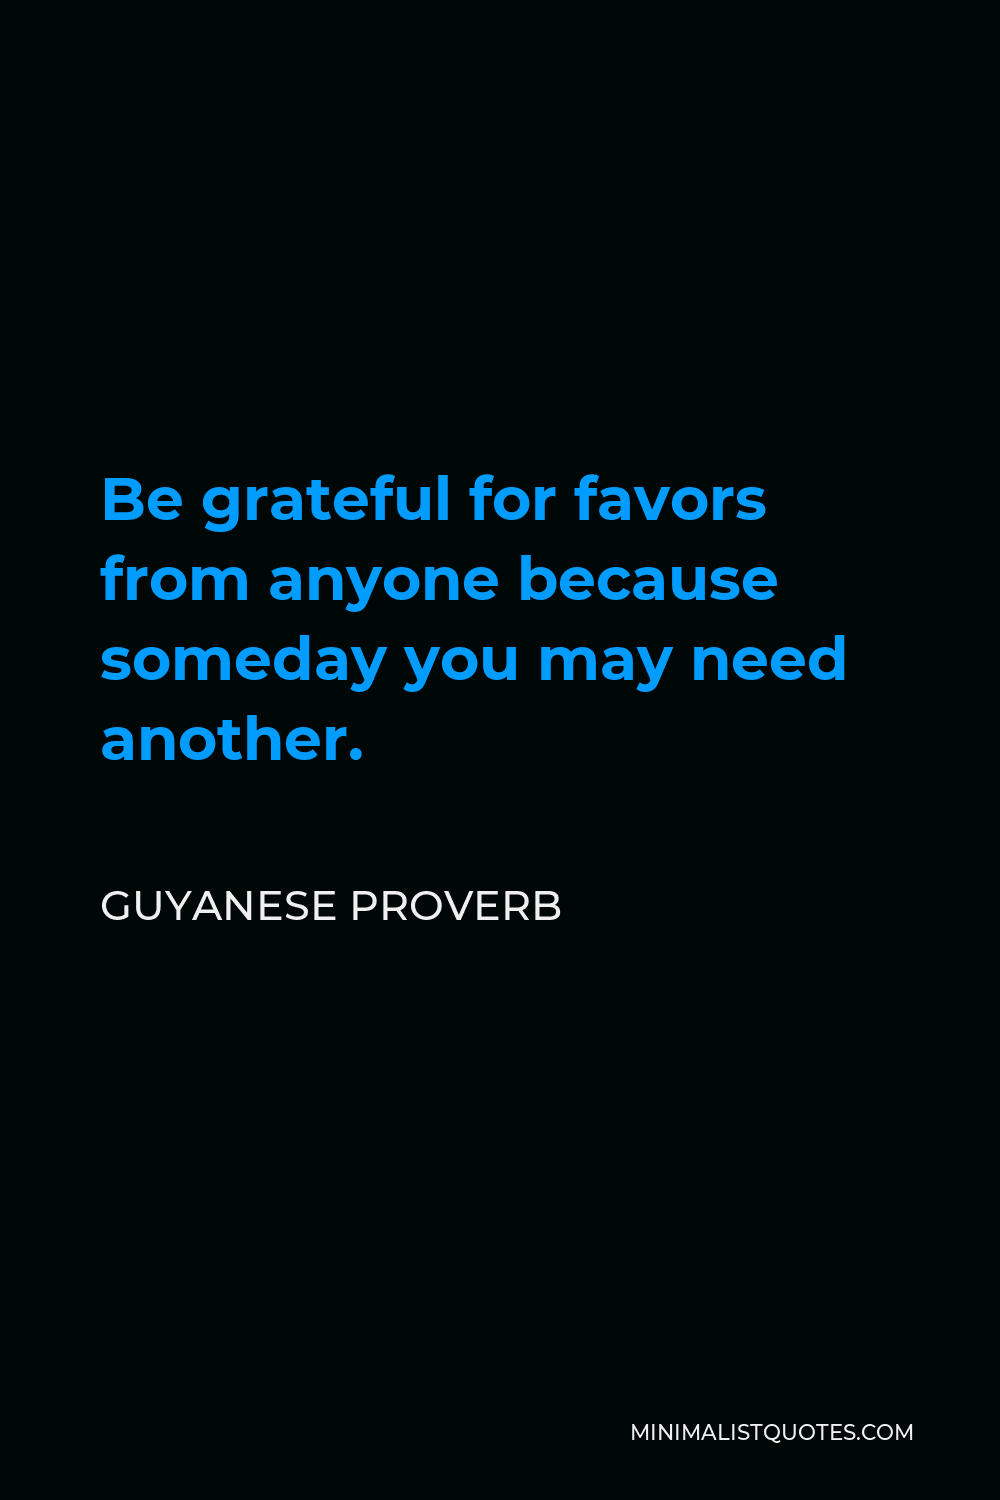 Guyanese Proverb Quote - Be grateful for favors from anyone because someday you may need another.